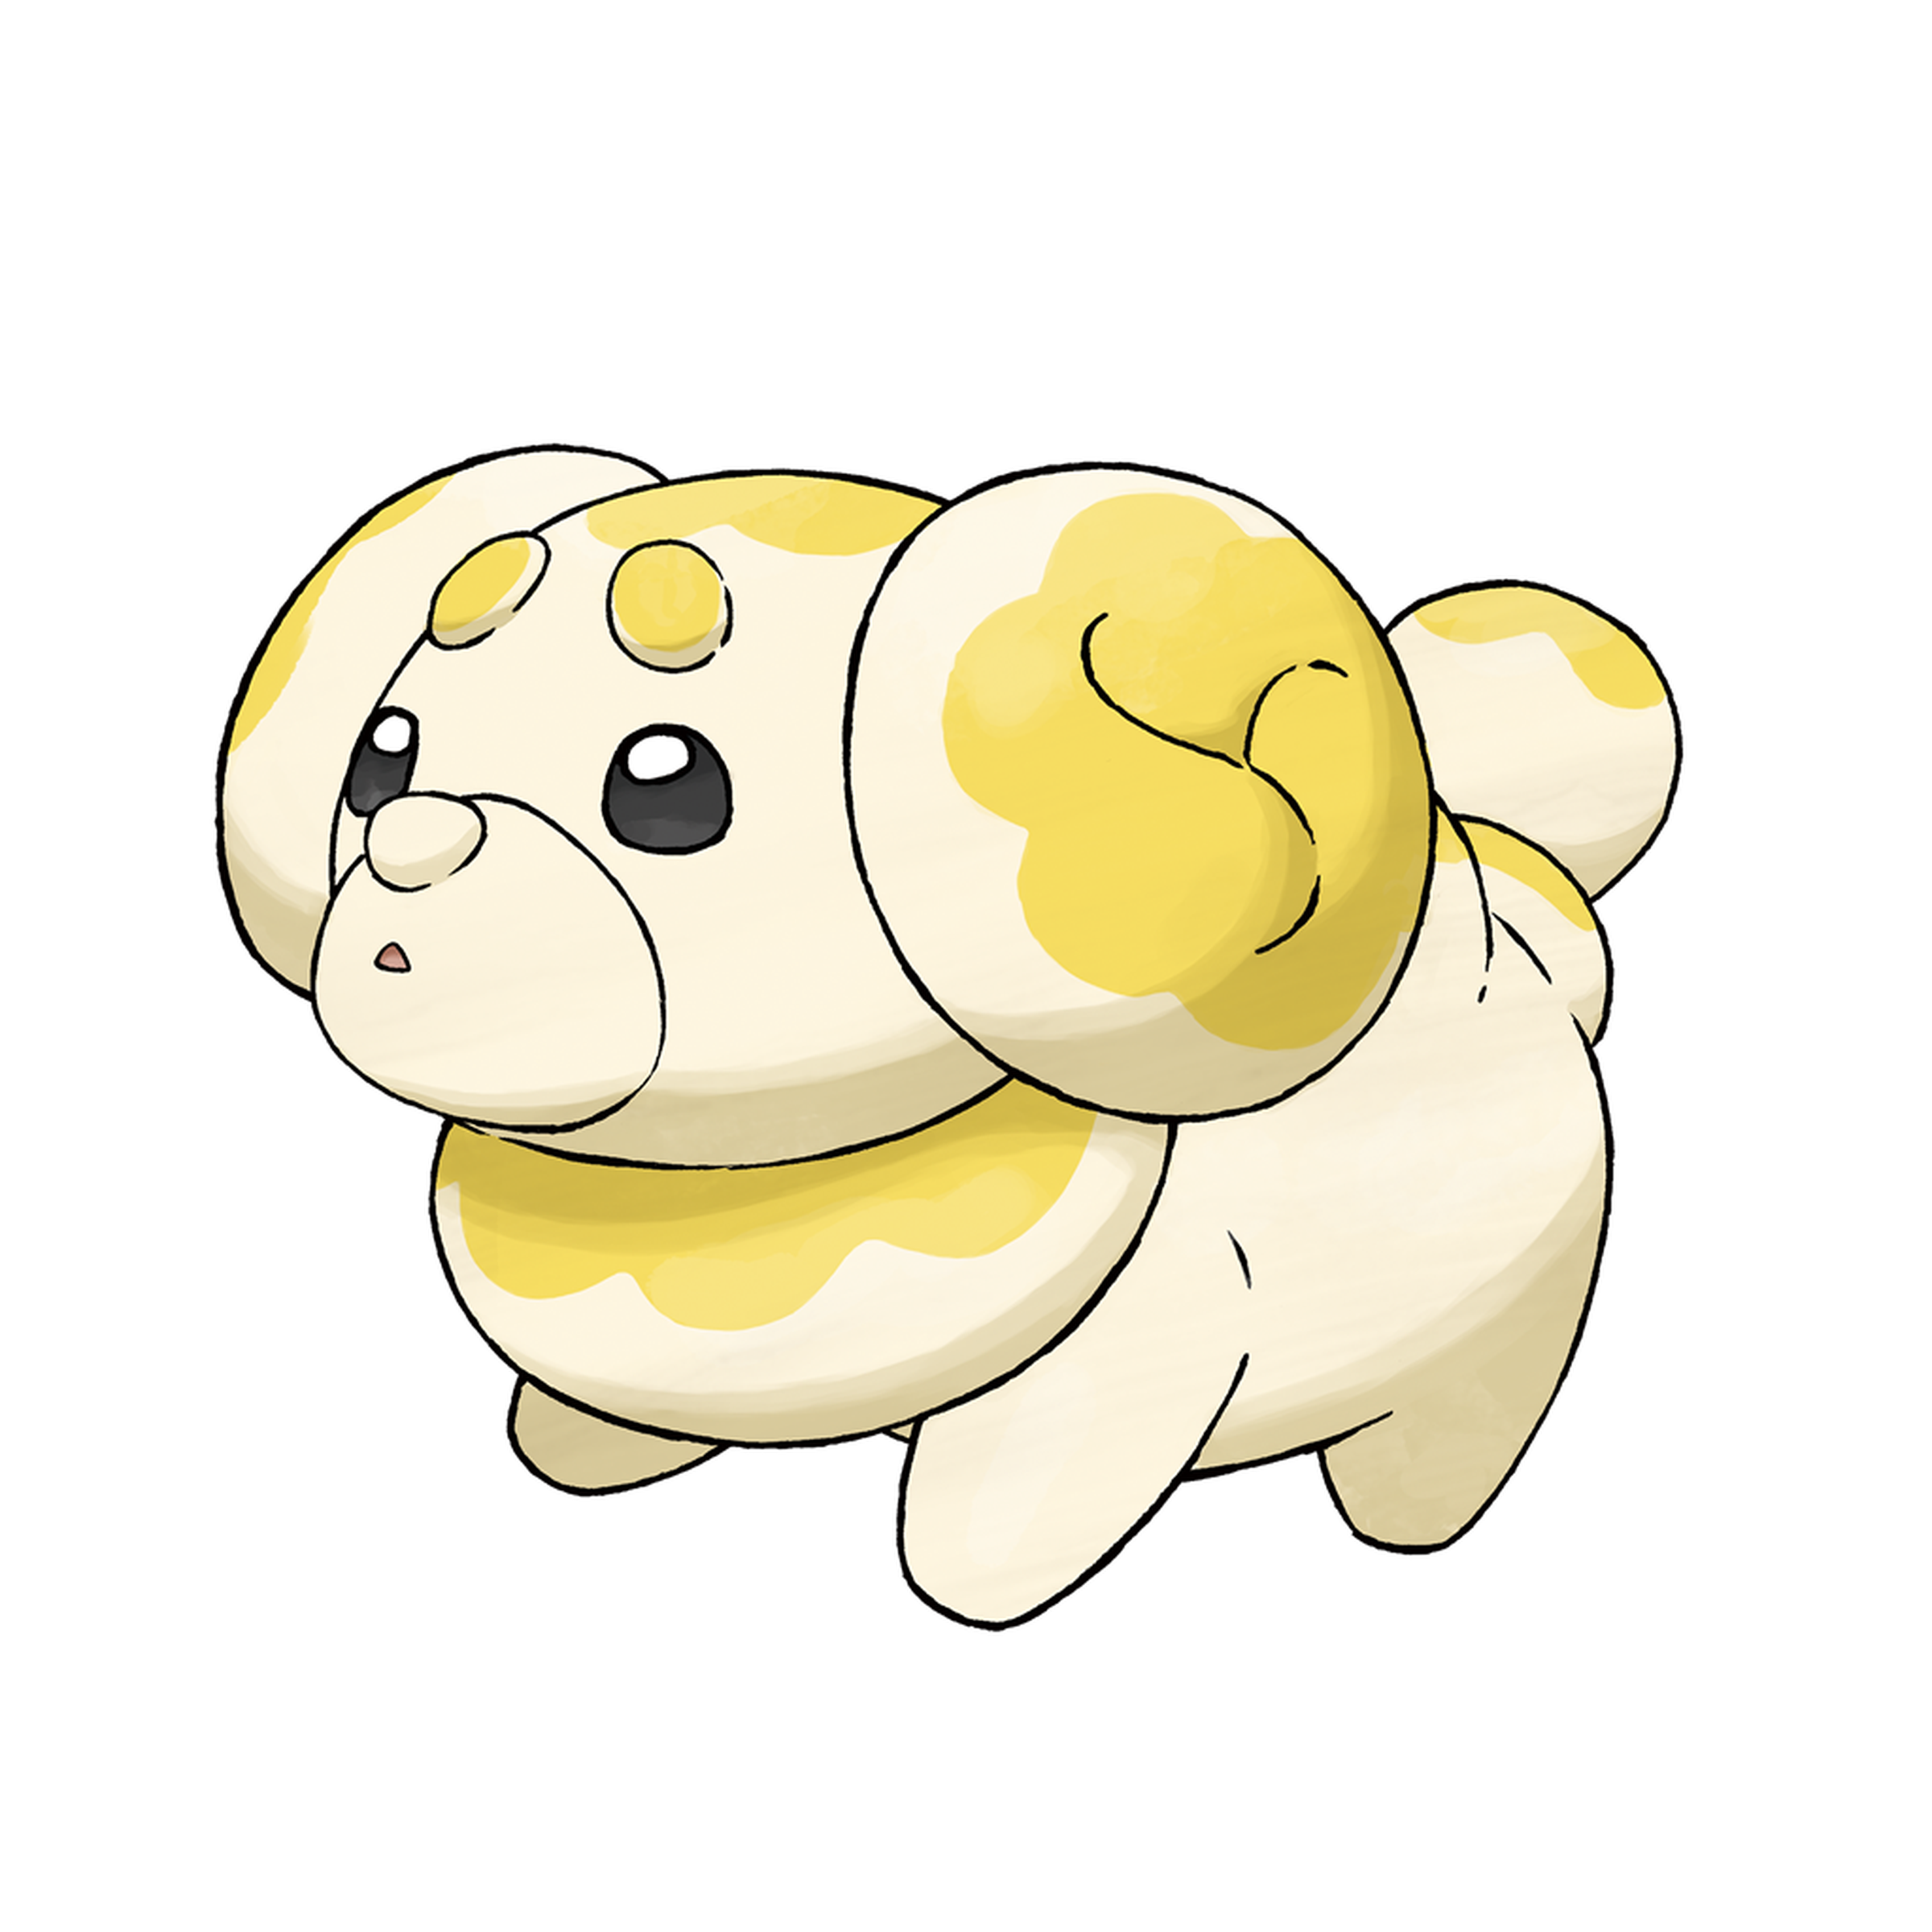 Image of new Pokémon Fidough which is a little Pomeranian-type dog made of pastry dough